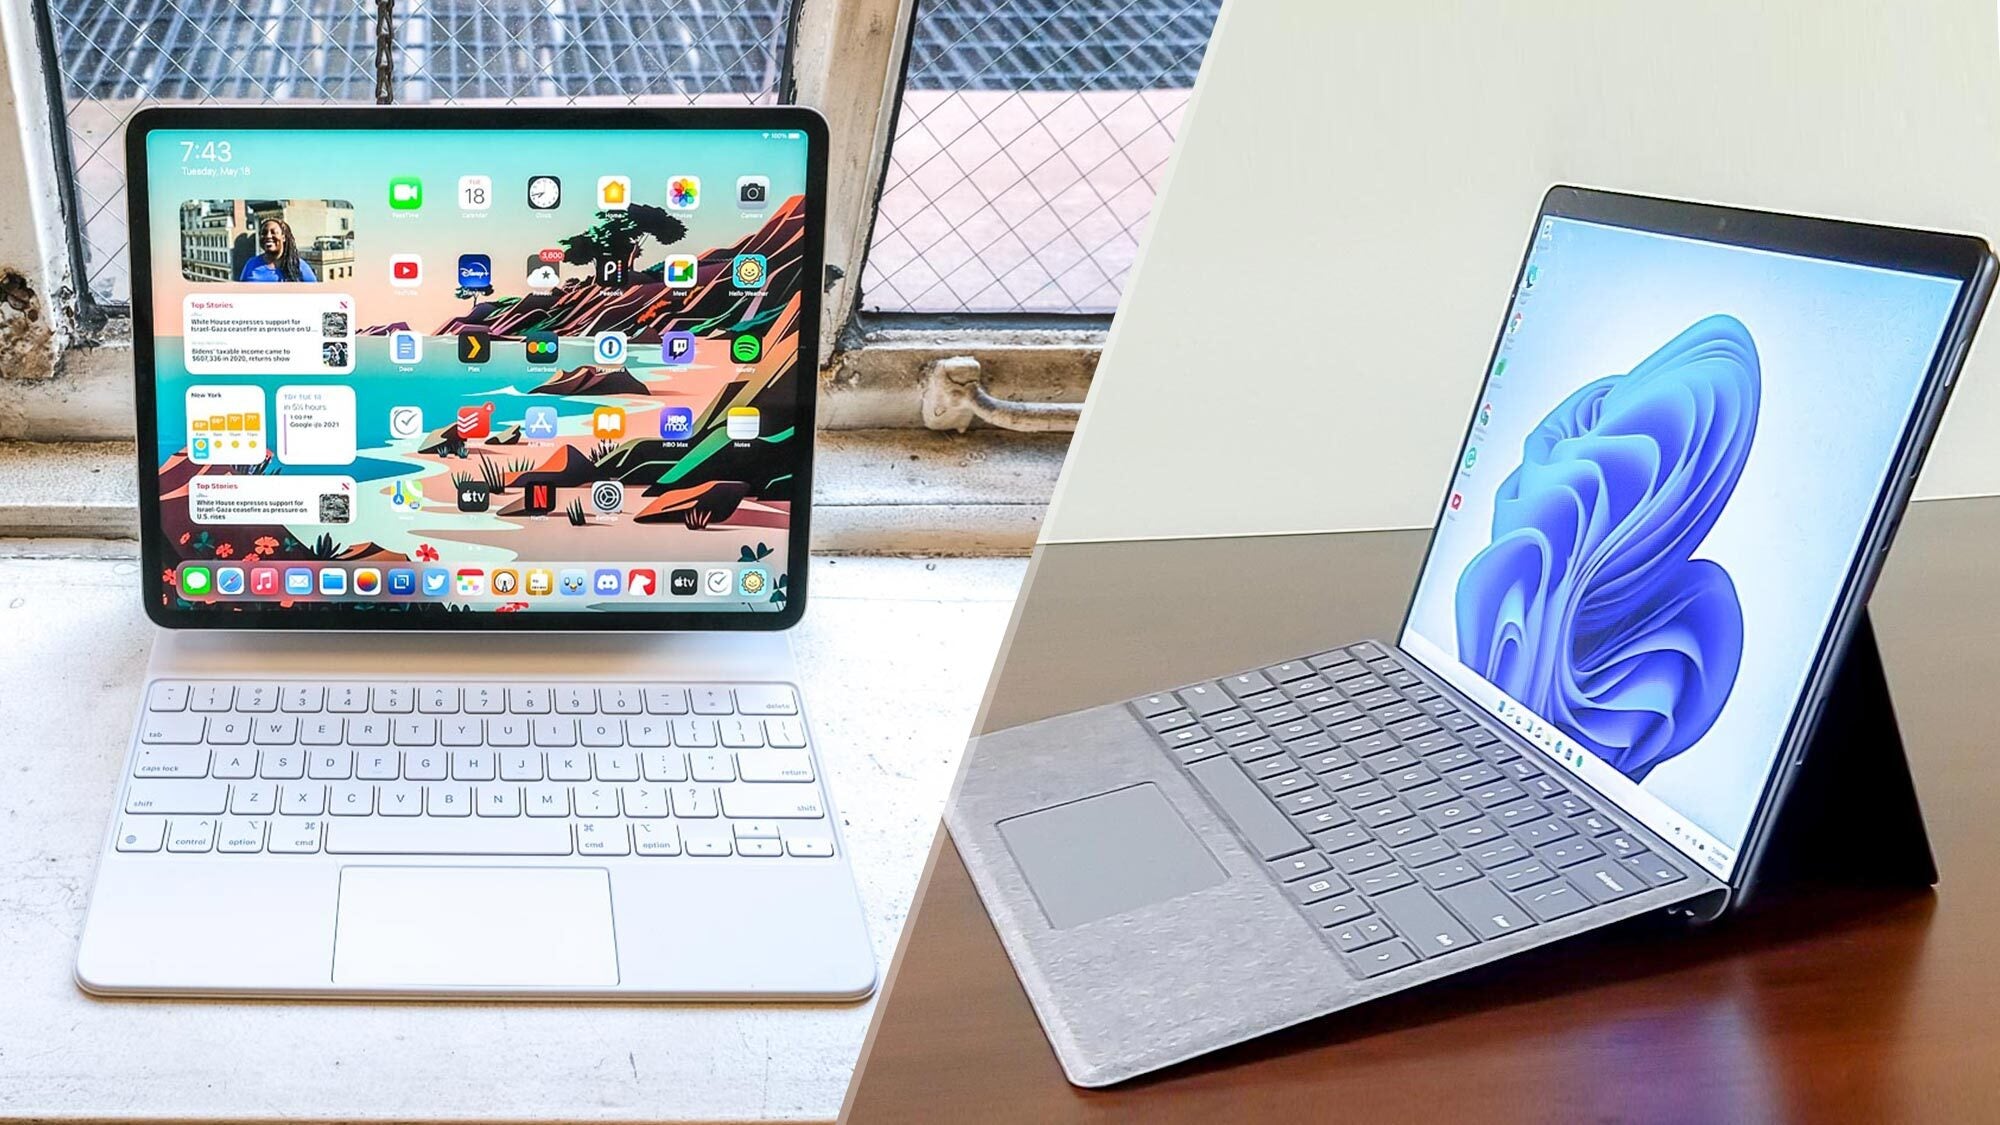 microsoft surface vs ipad: What You Need to Know Before Buying